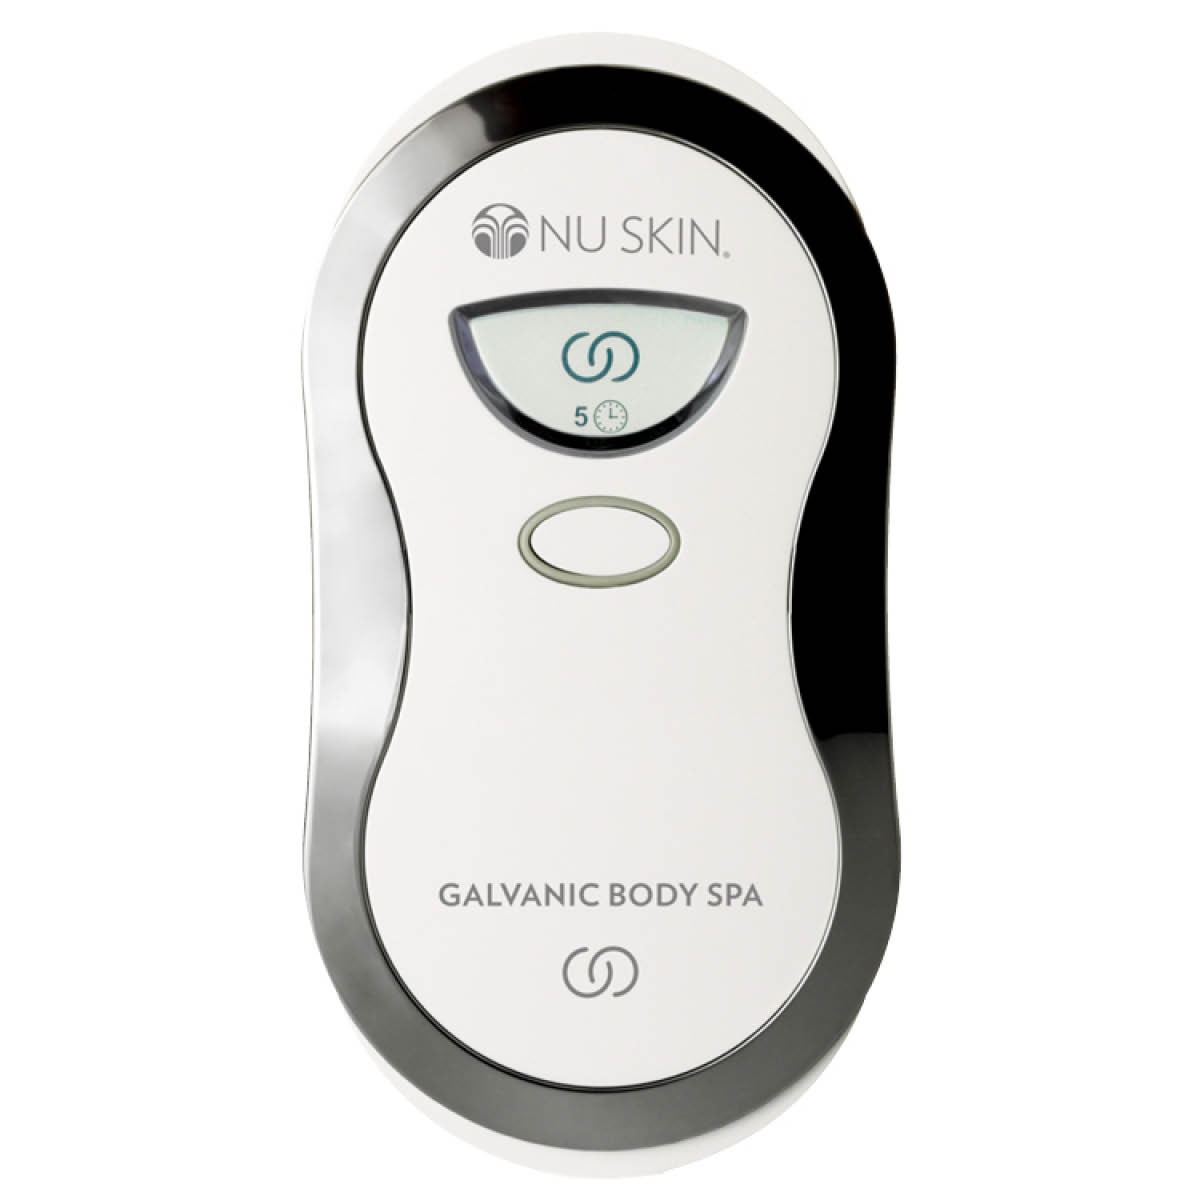 Galvanic body spa for a more contured, smoother and firmer looking body.  Aids in delivering key ingredients to the skin…